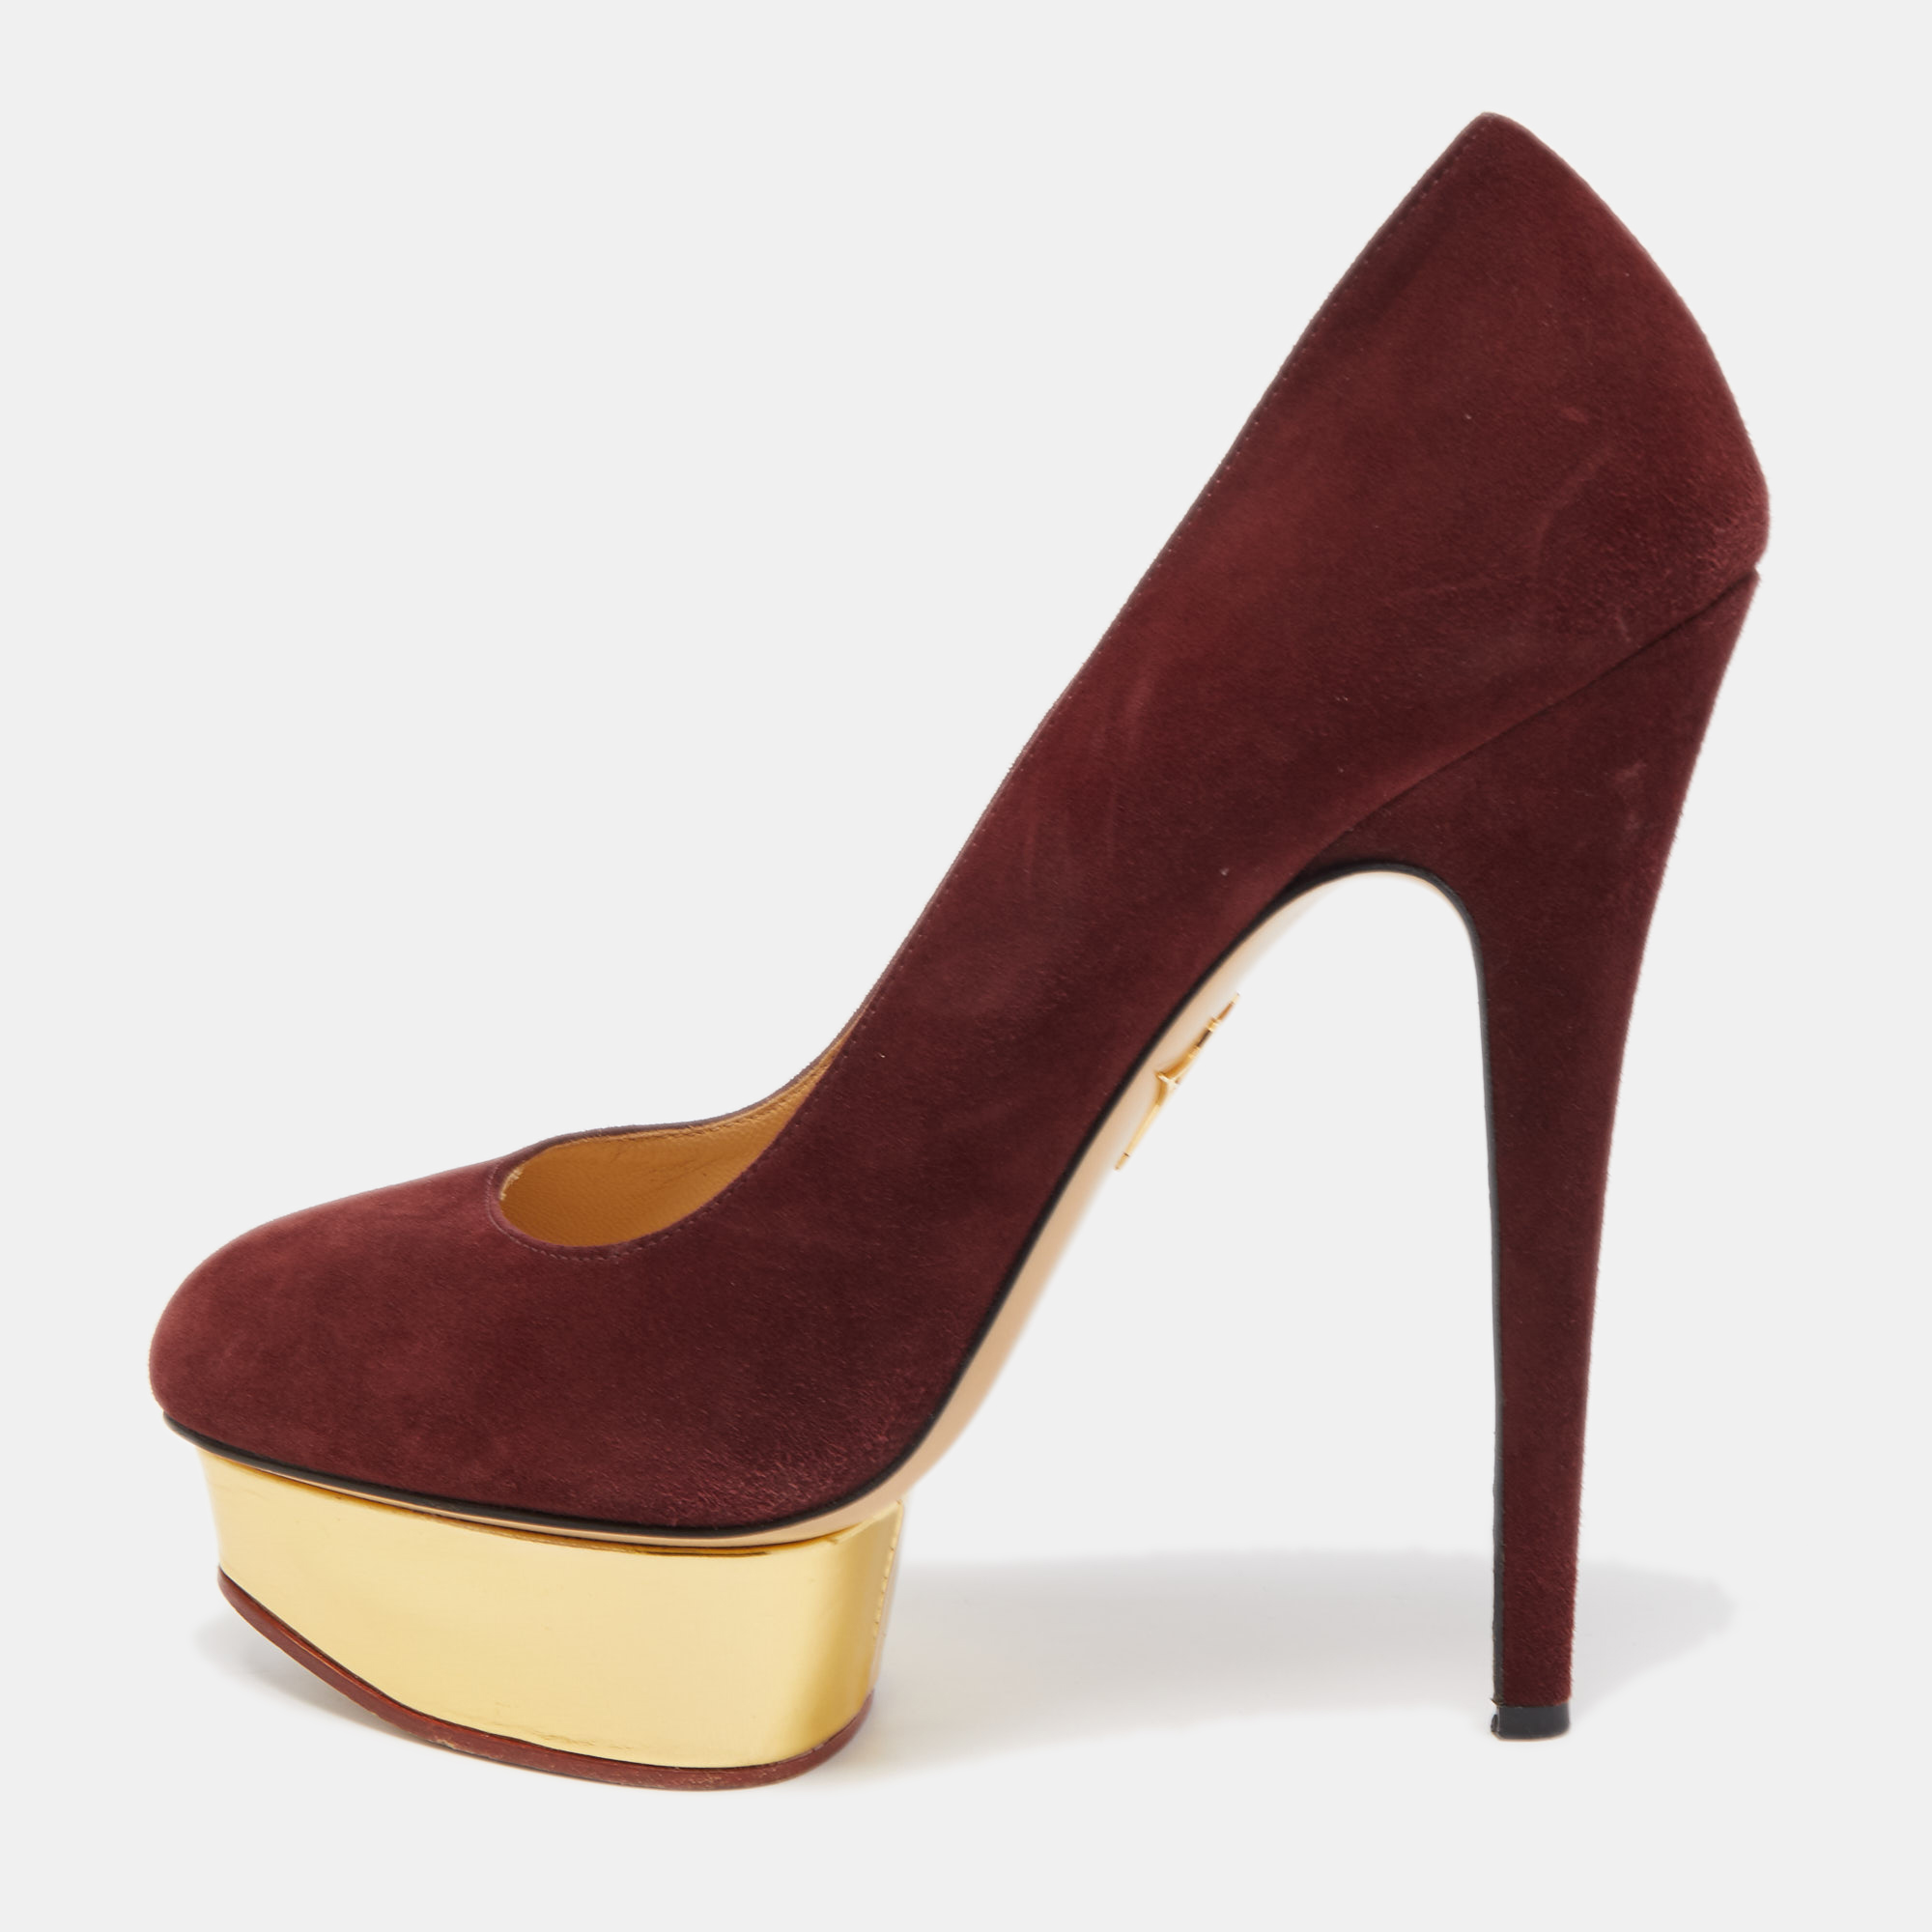 Pre-owned Charlotte Olympia Burgundy Suede Dolly Platform Pumps Size 40